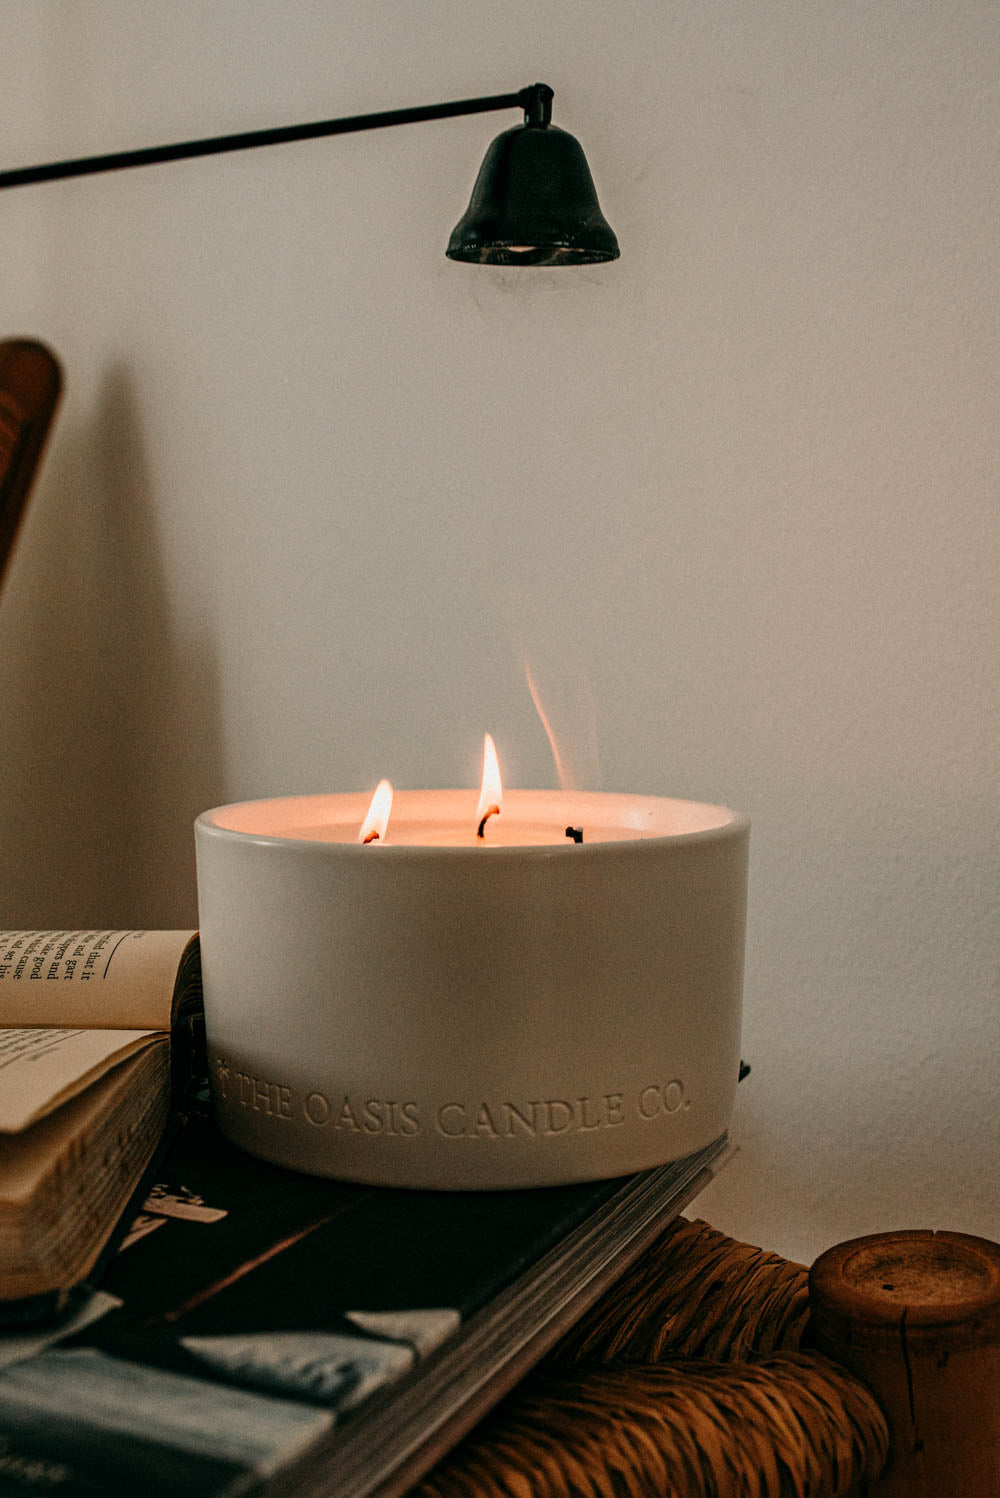 A Tonka and Myrrh scented candle from home fragrance brand, The Oasis Candle Co